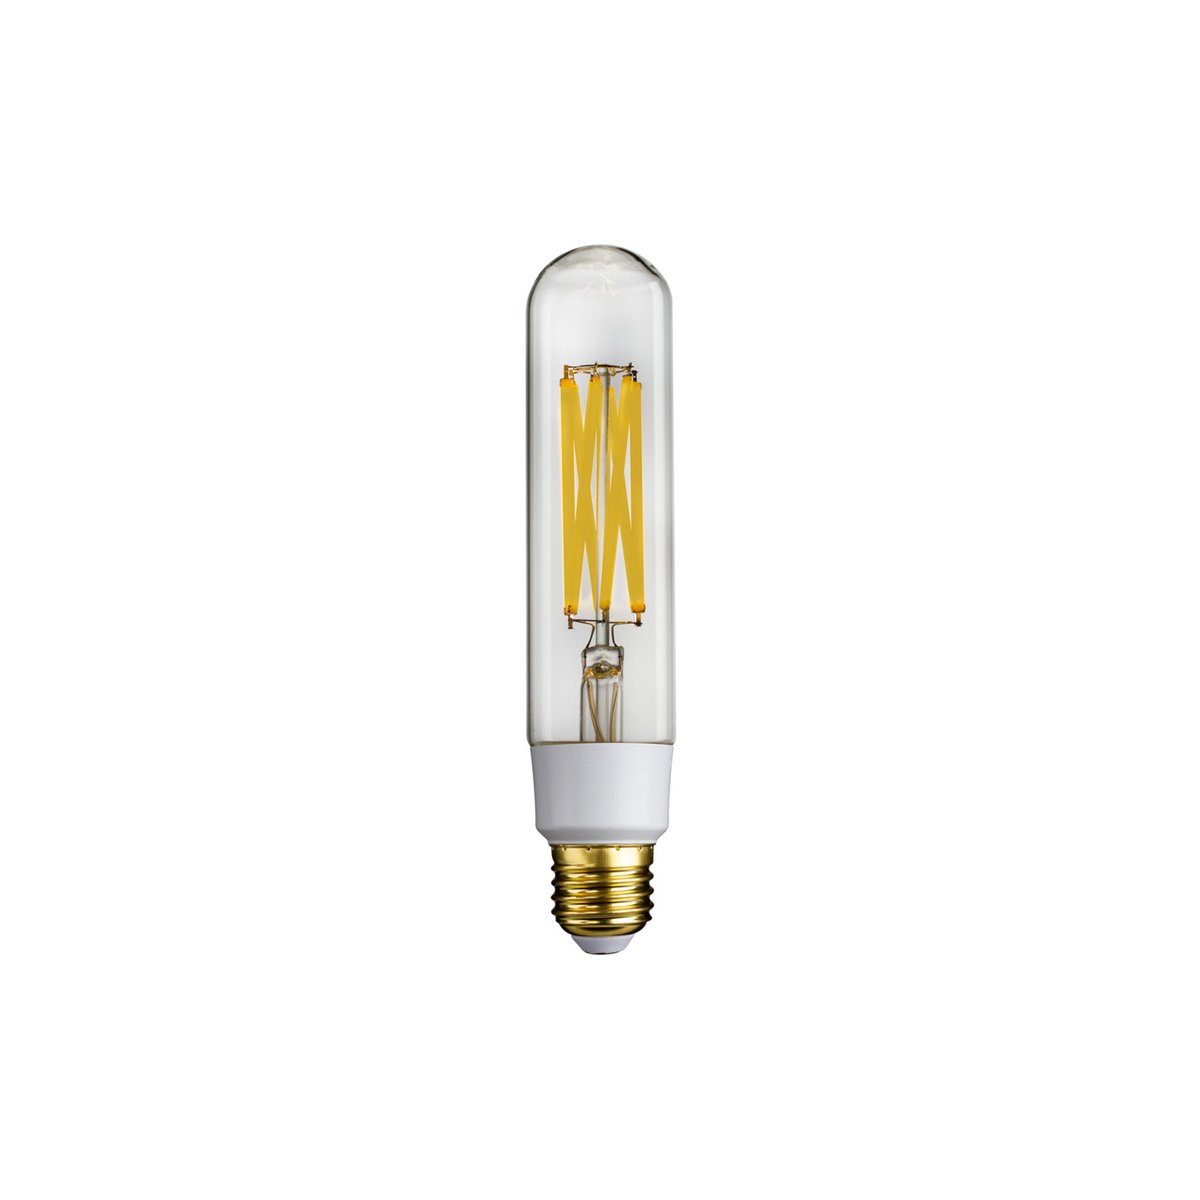 Octrooi Tragisch wolf LED bulb E27 T38 15W 2000lm Proxima 927, dimmable | Finnish Design Shop